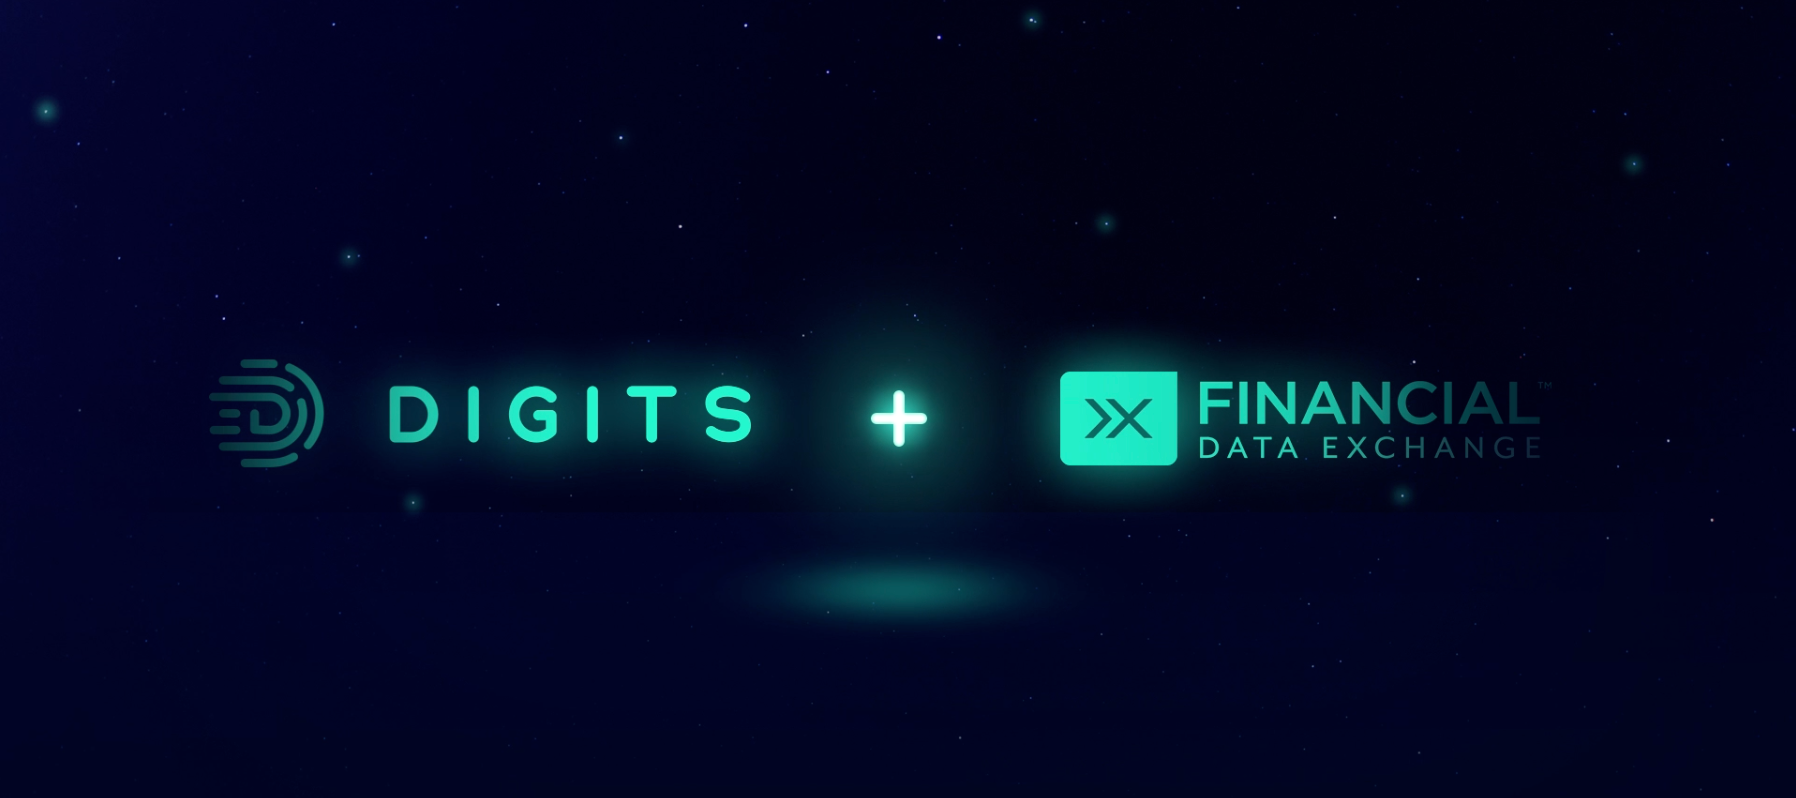 Digits joins the Financial Data Exchange (FDX) to strengthen secure data access